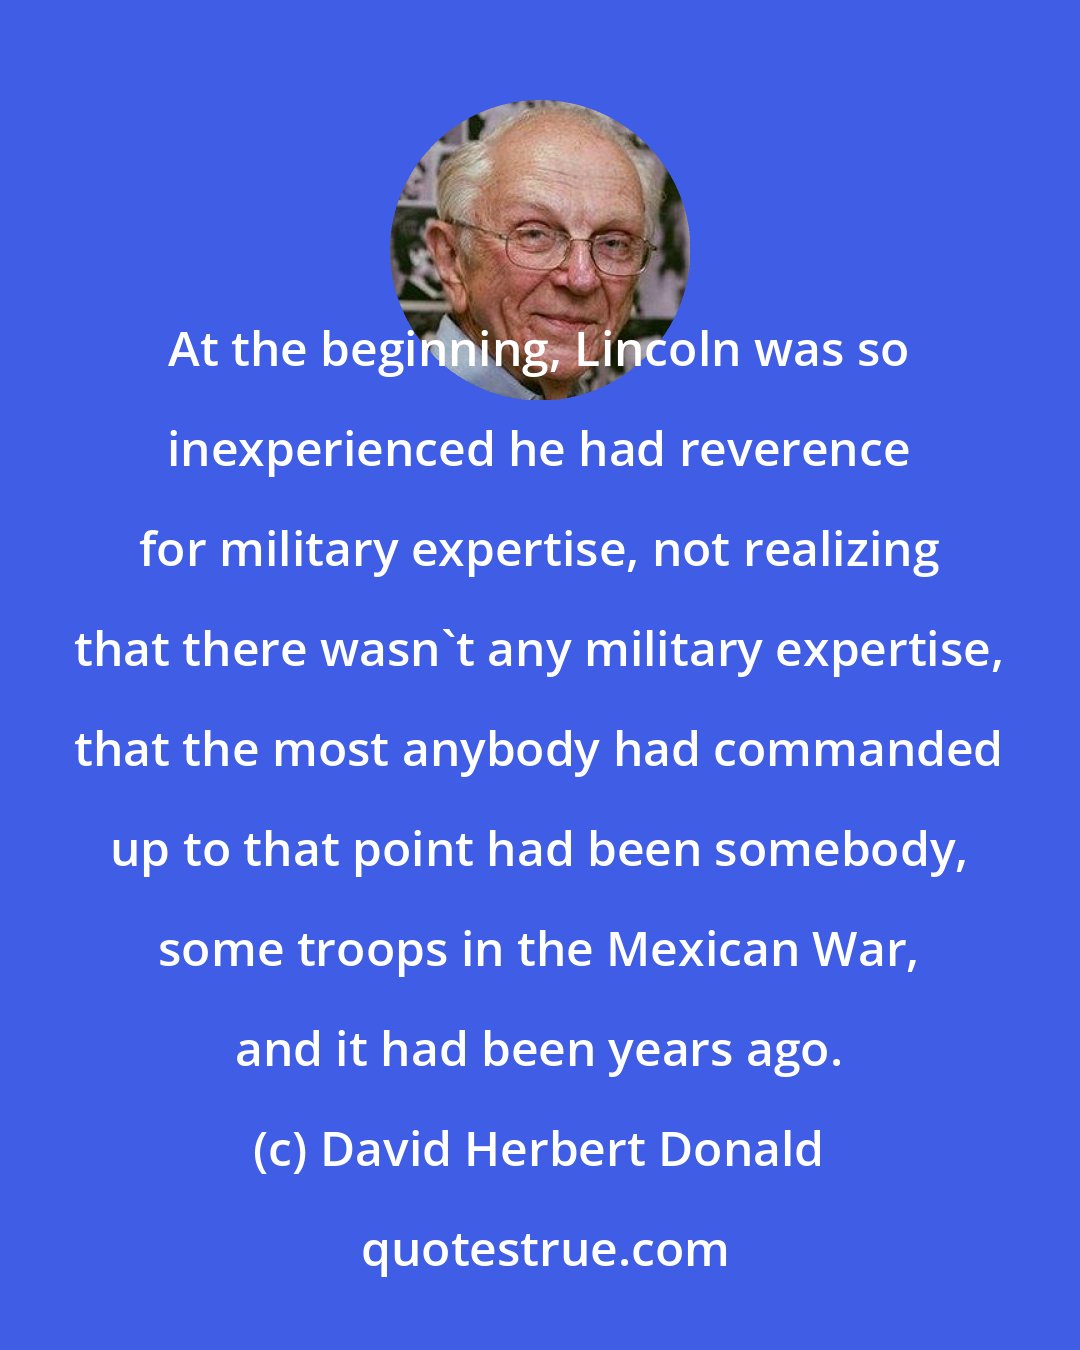 David Herbert Donald: At the beginning, Lincoln was so inexperienced he had reverence for military expertise, not realizing that there wasn't any military expertise, that the most anybody had commanded up to that point had been somebody, some troops in the Mexican War, and it had been years ago.